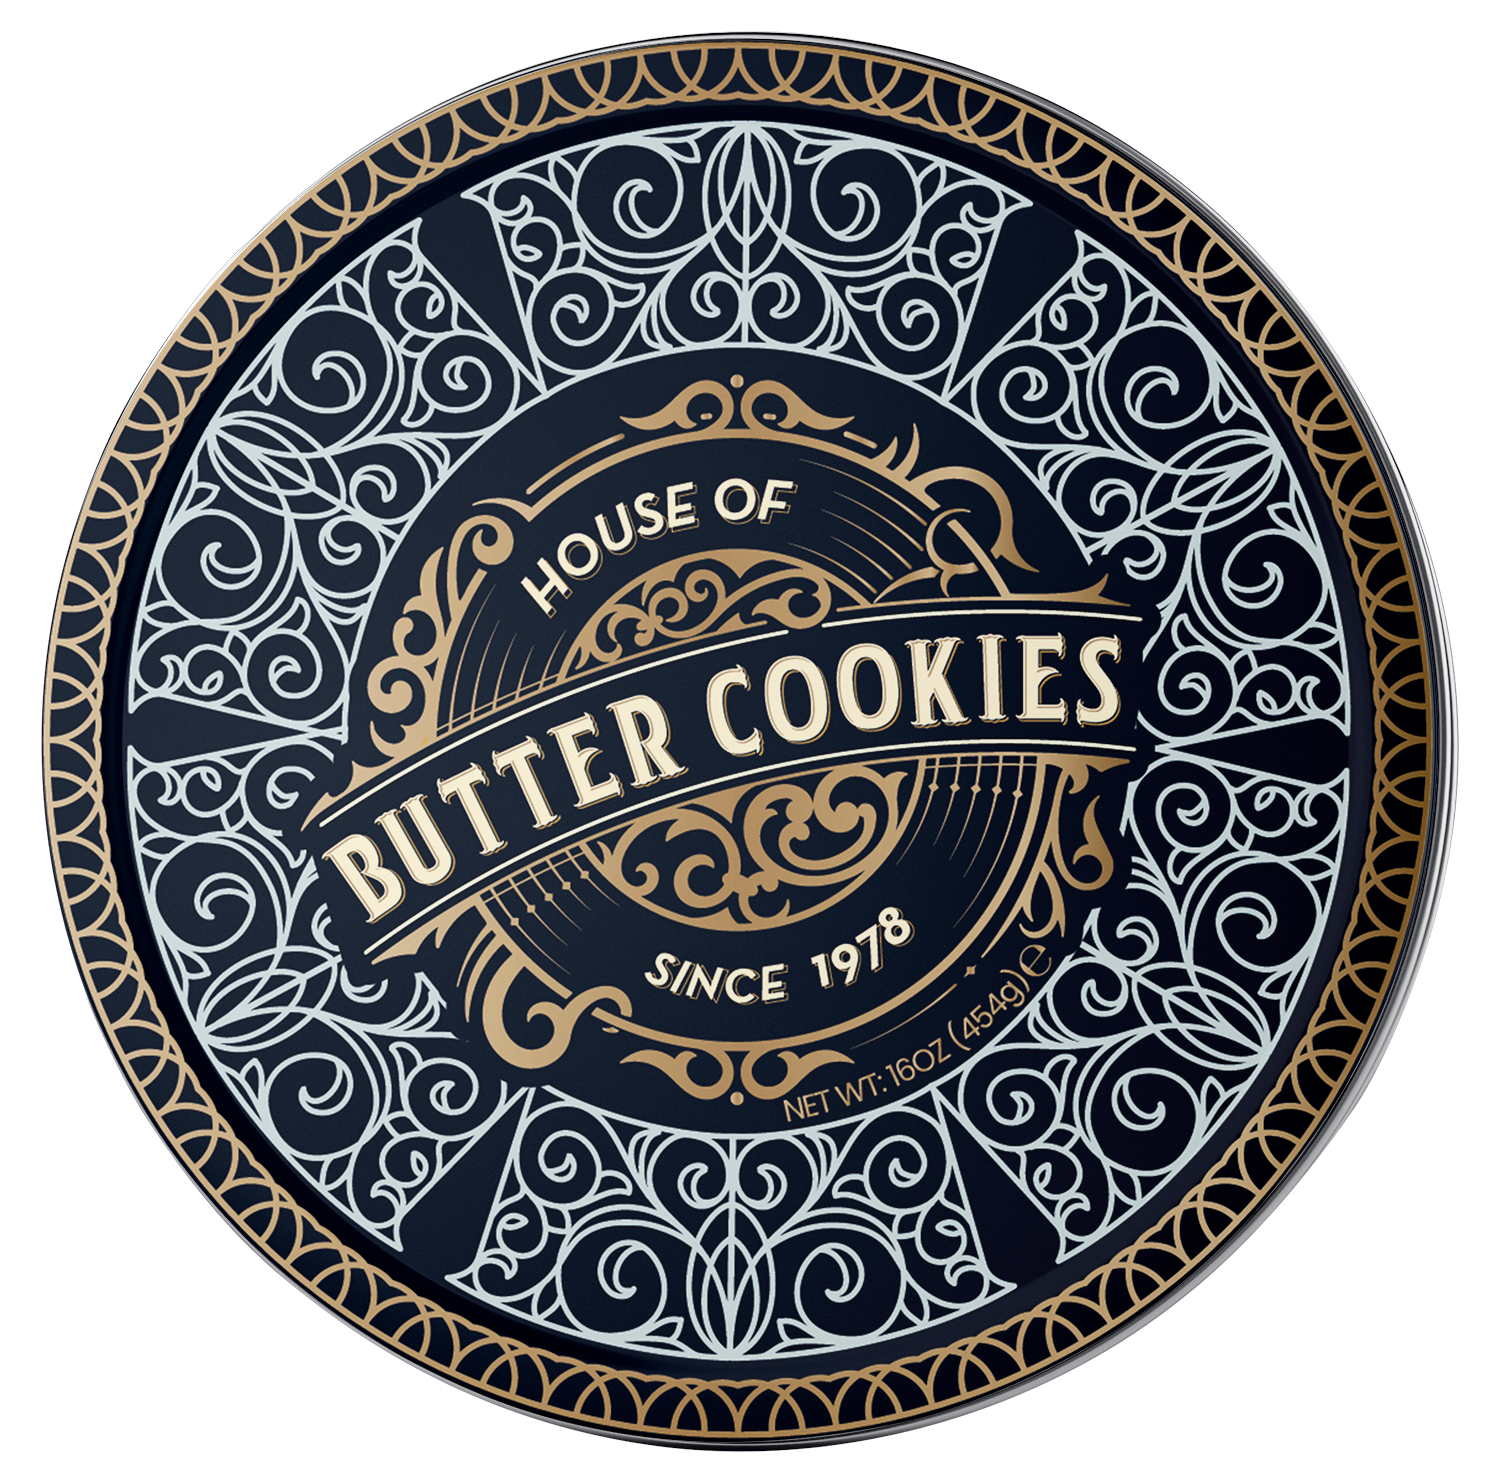 House of Butter Cookies – Image